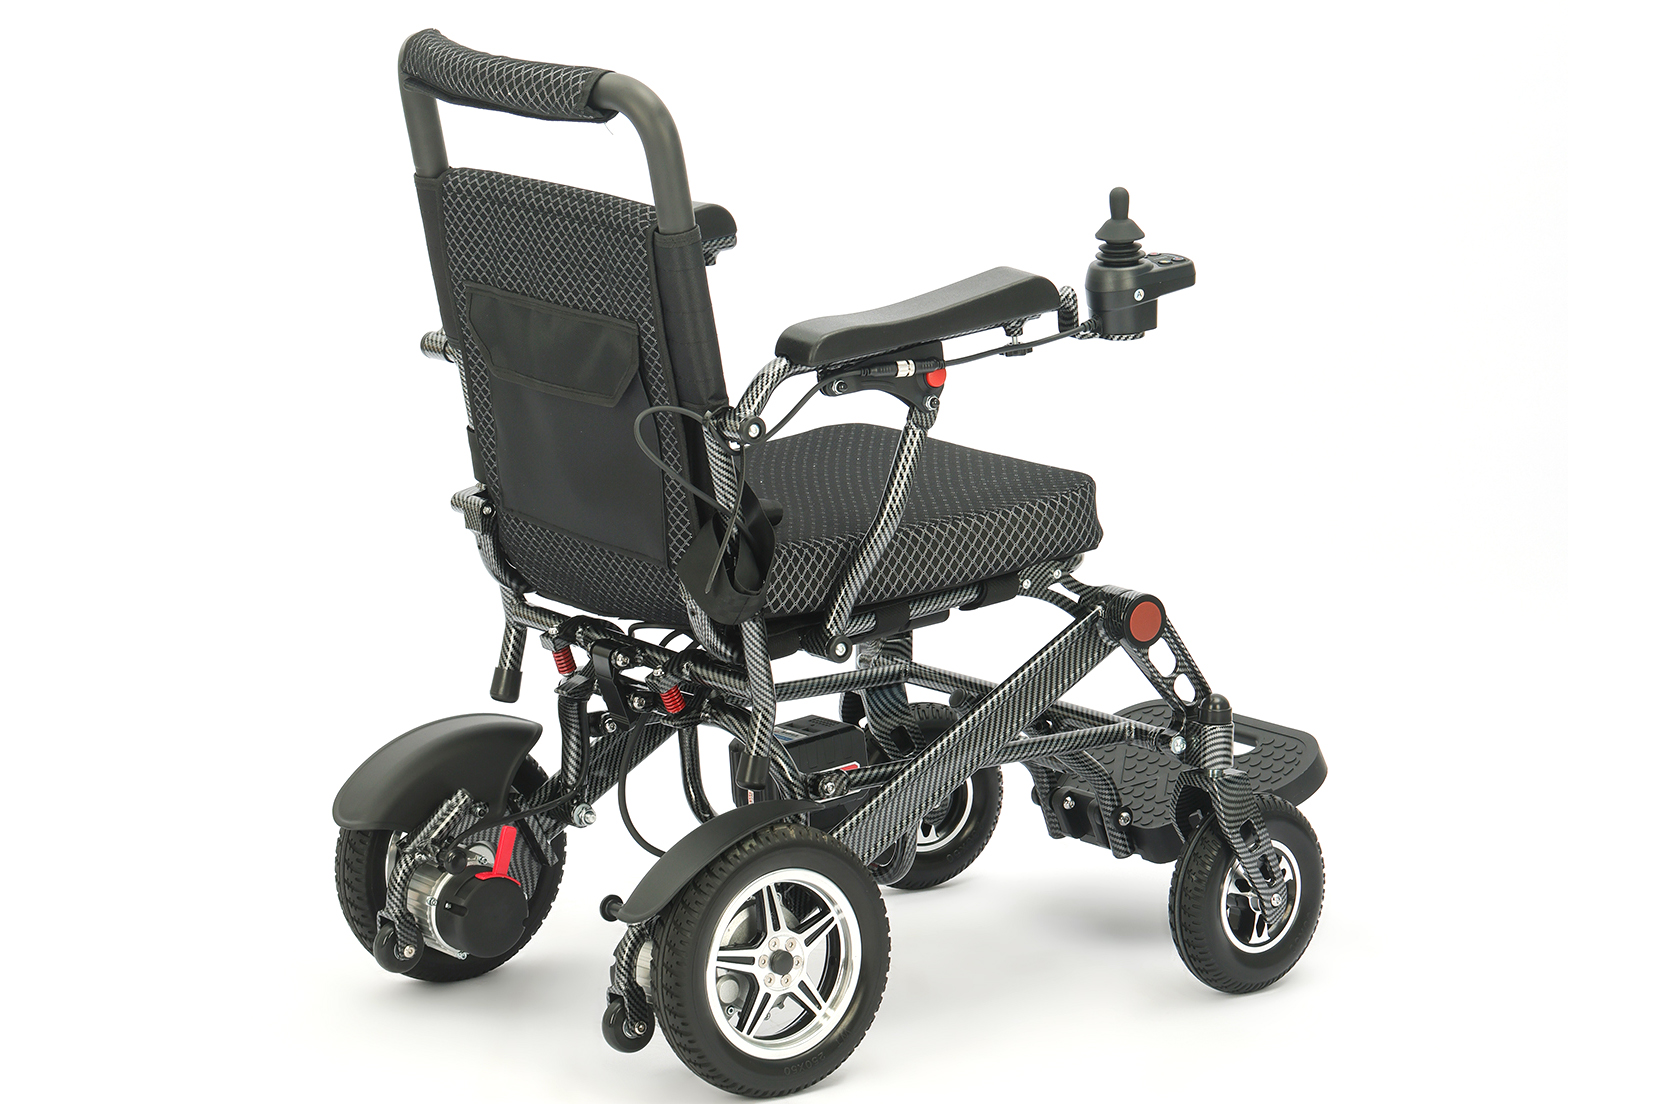 How to choose a lightweight, comfortable, and affordable electric wheelchair for elderly people at home?